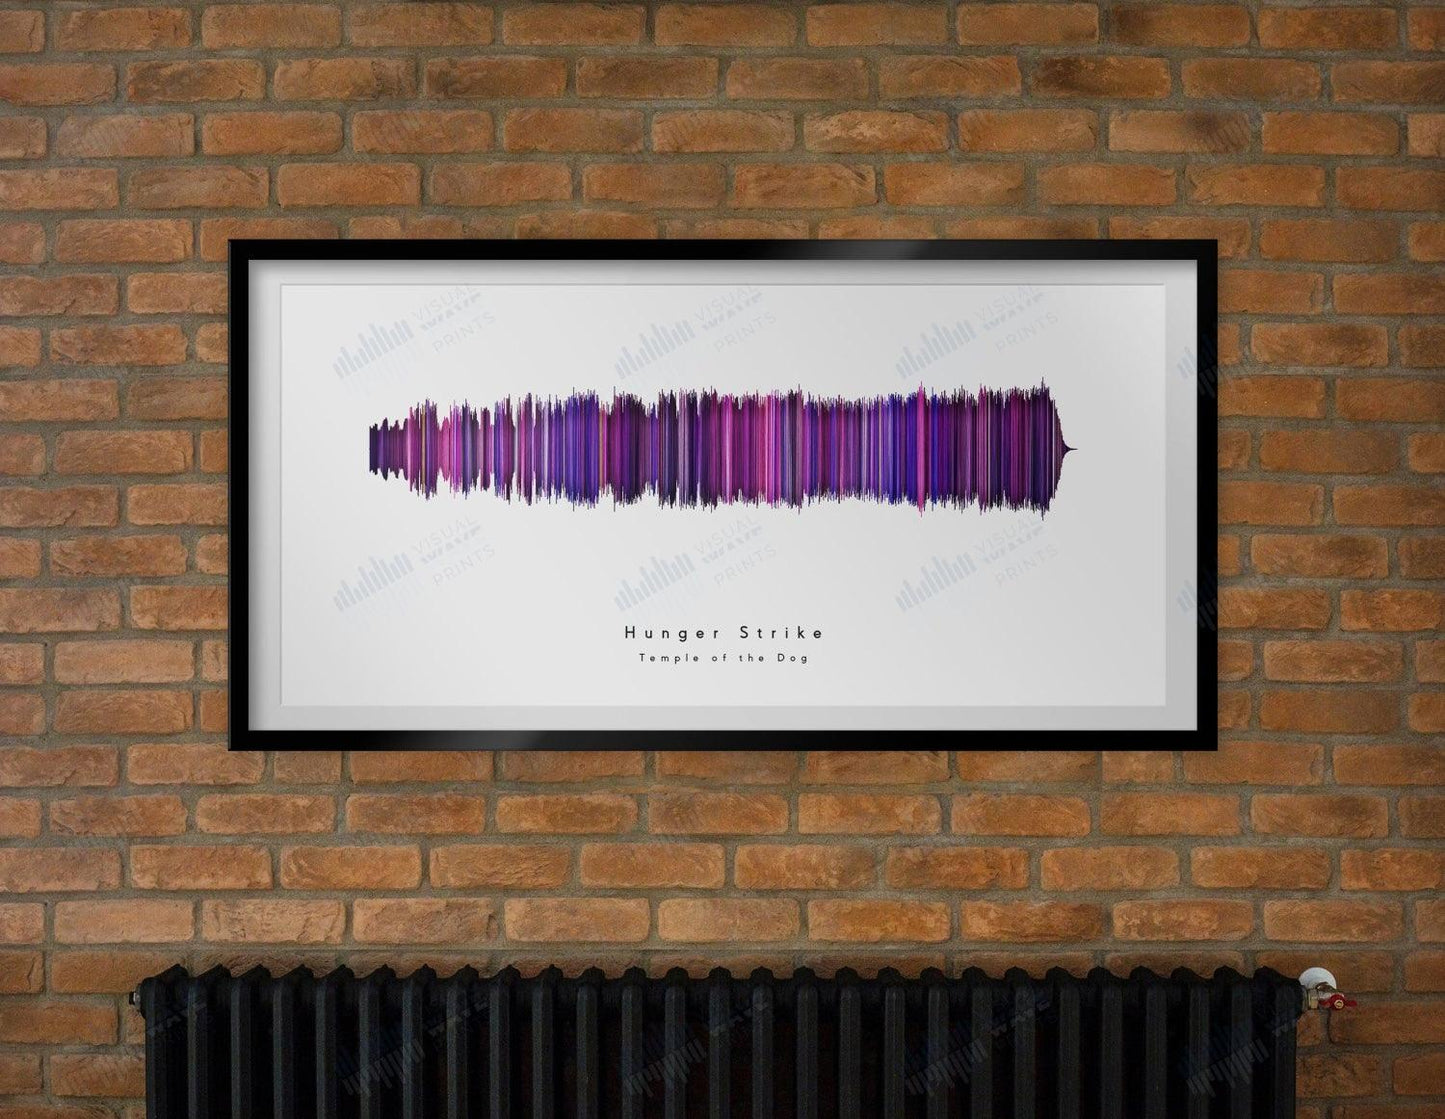 Hunger Strike by Temple of the Dog - Visual Wave Prints